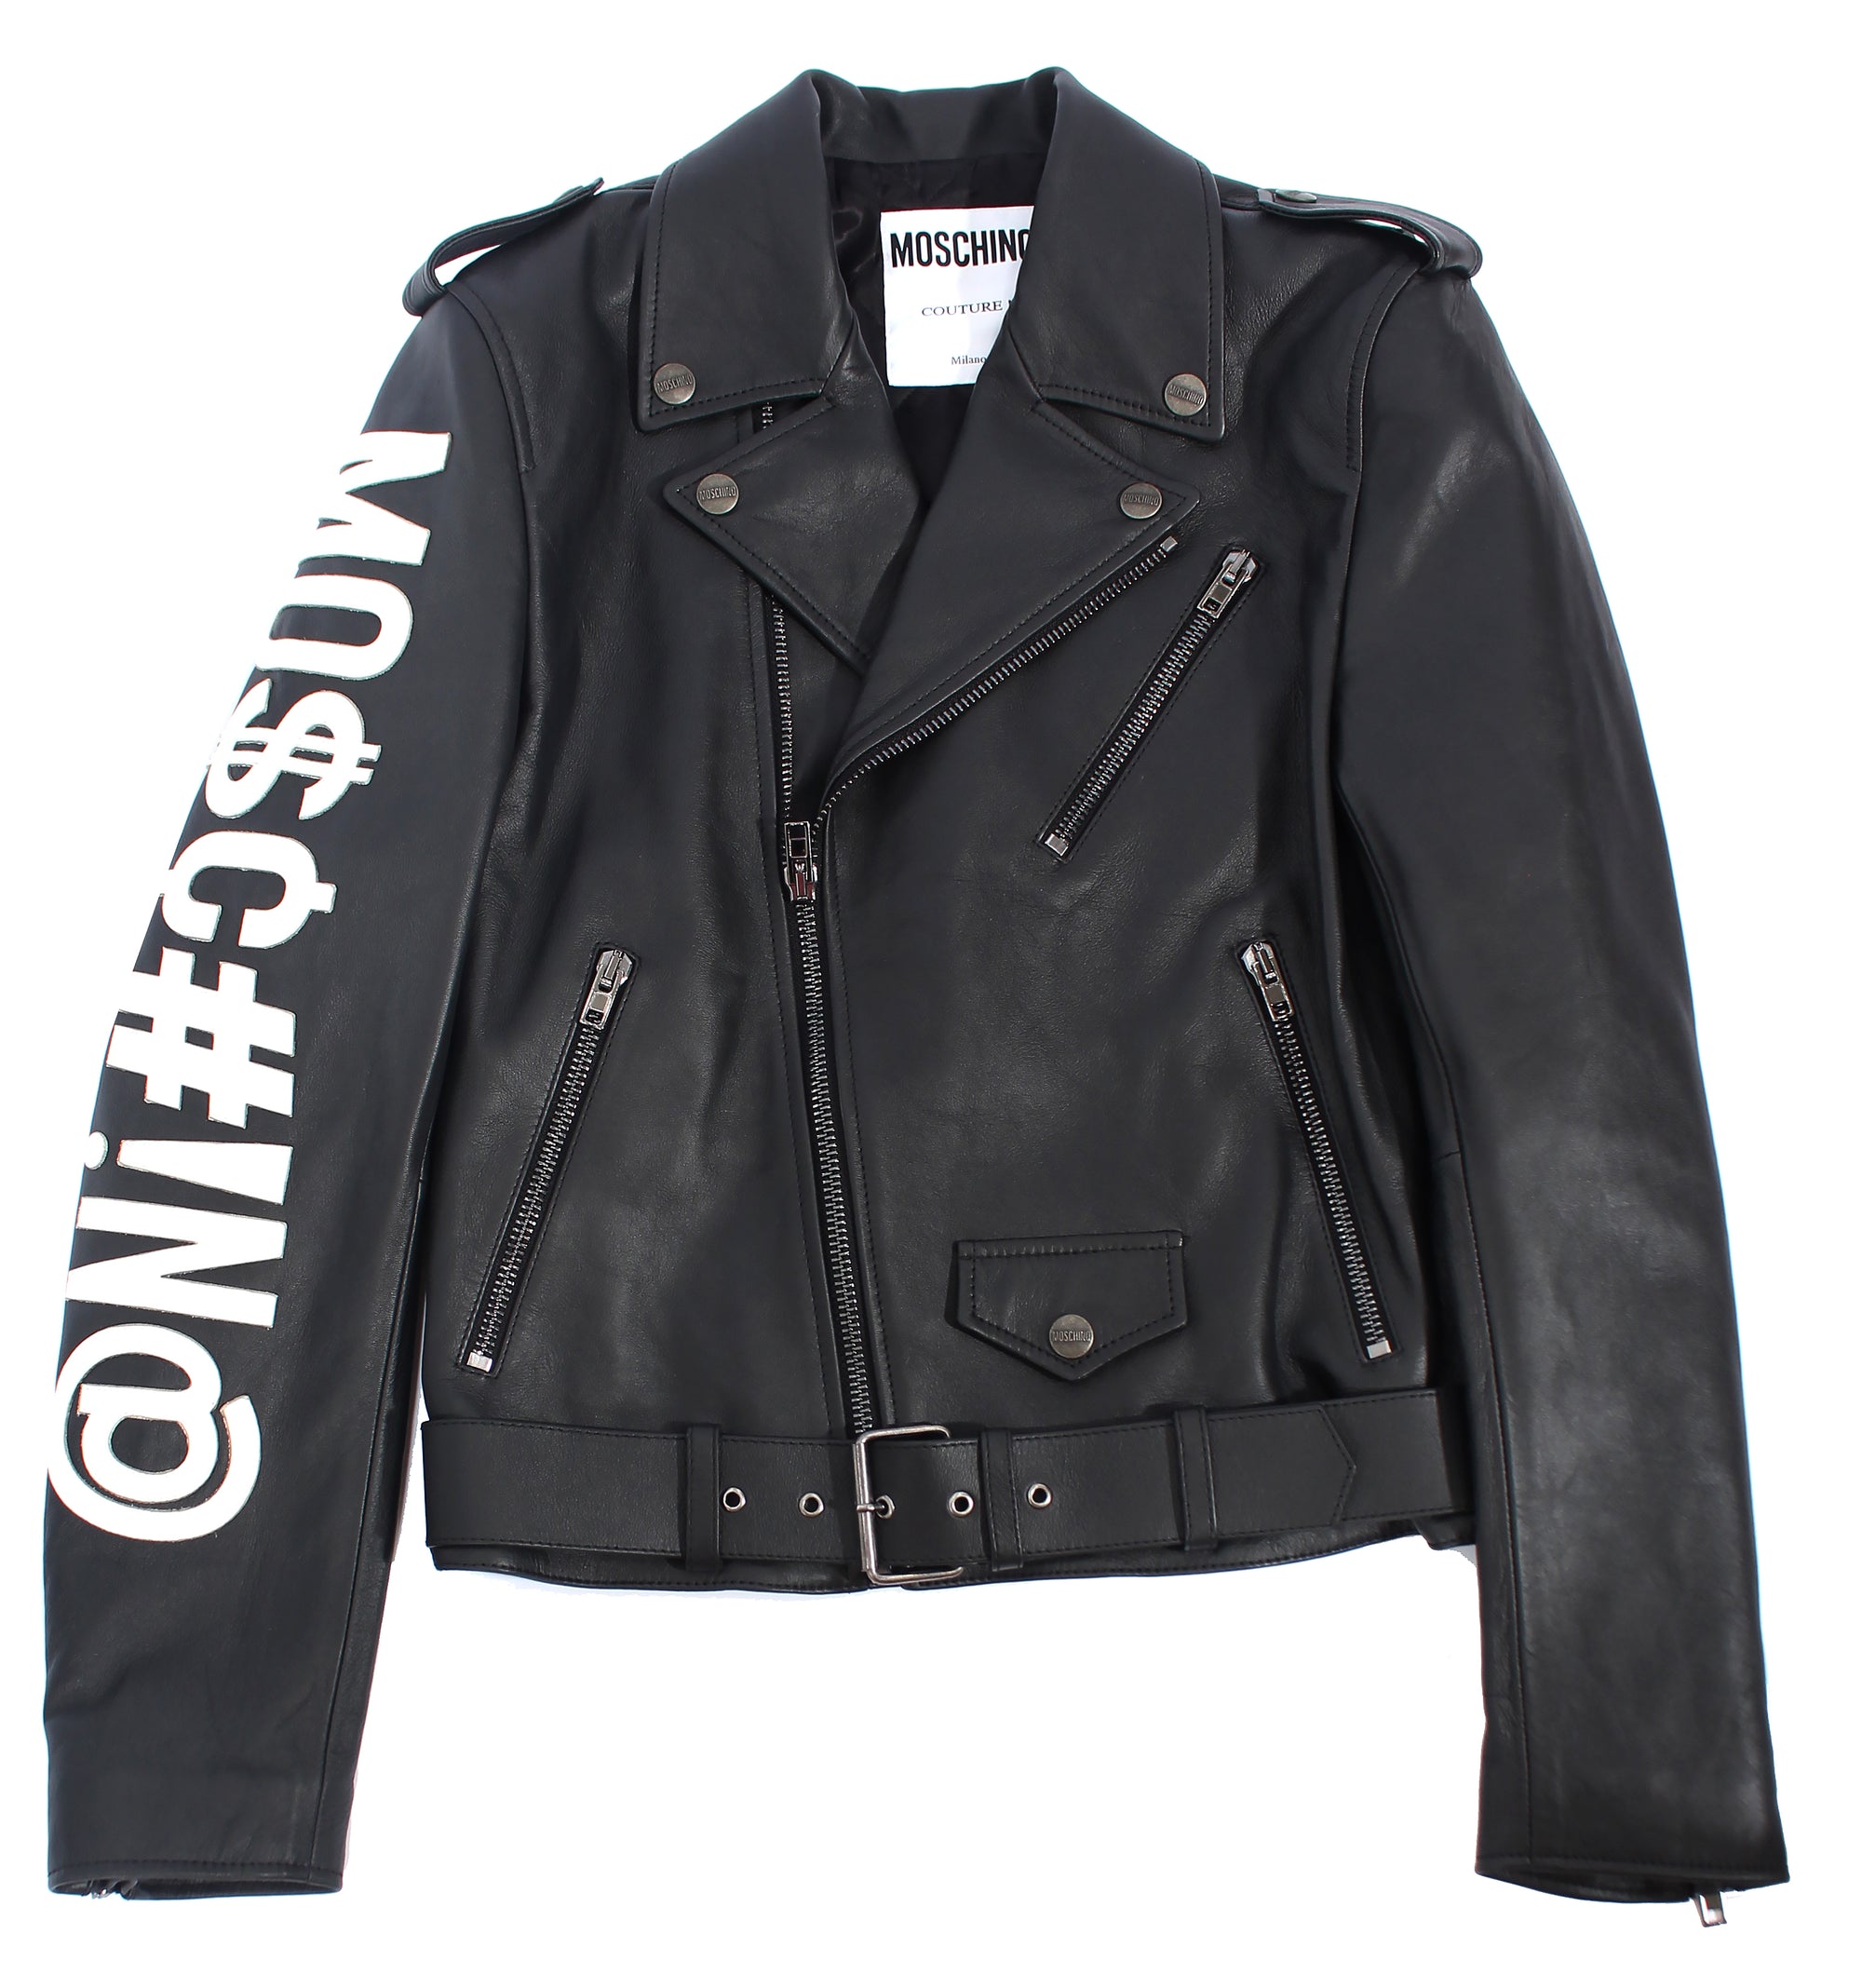 Moschino Embroidered Leather Jacket - Black